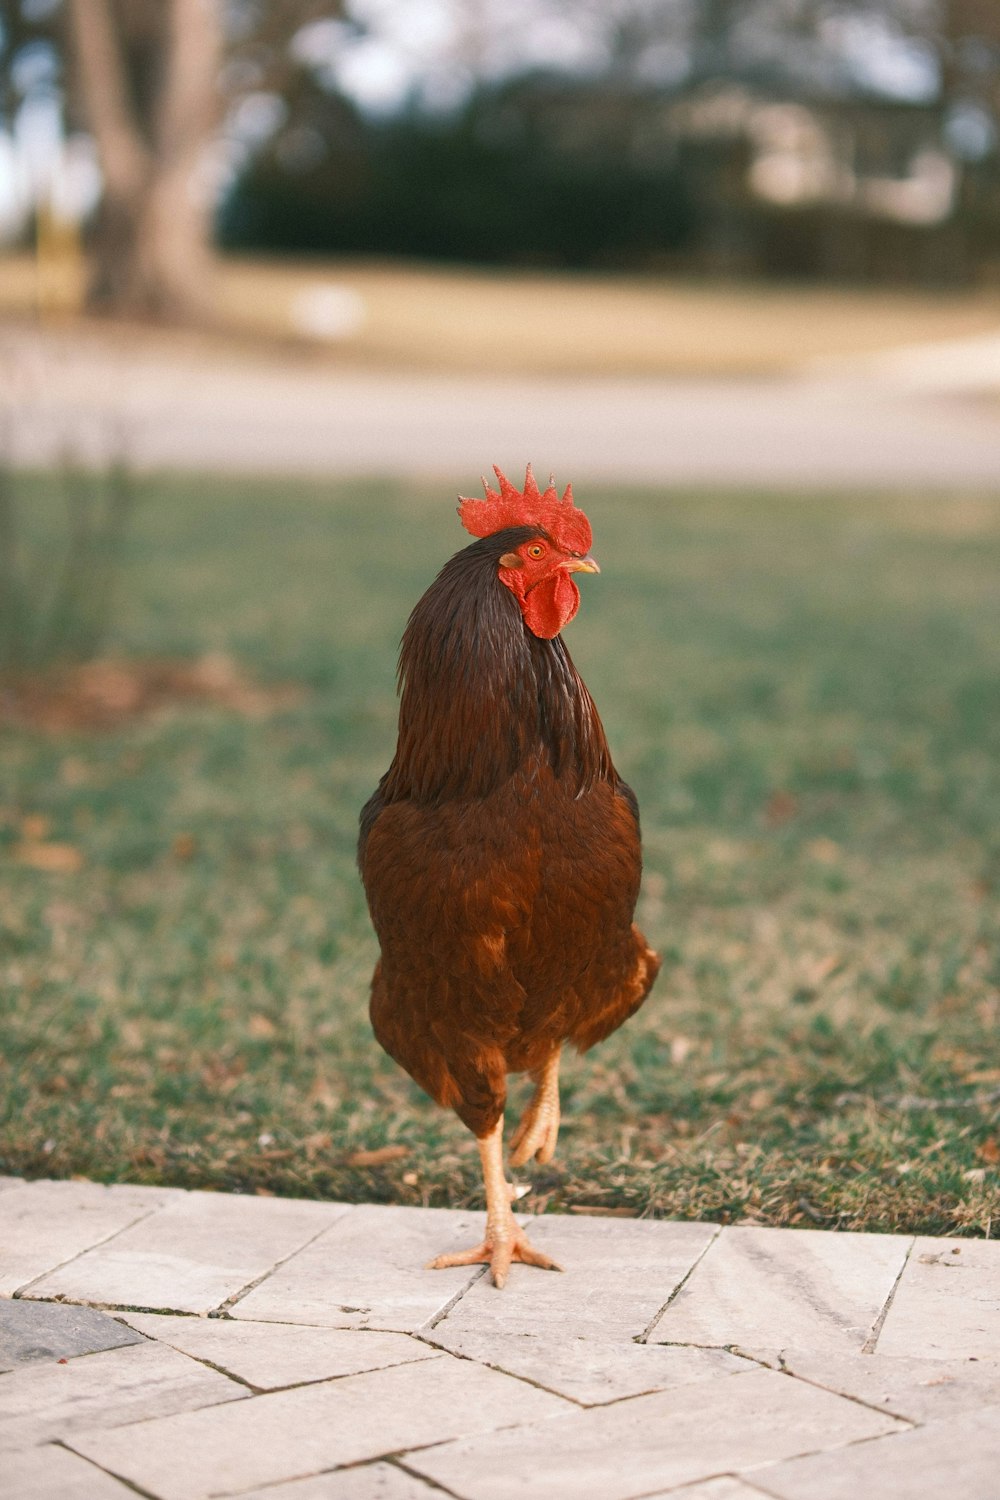 a rooster standing on a sidewalk in the grass